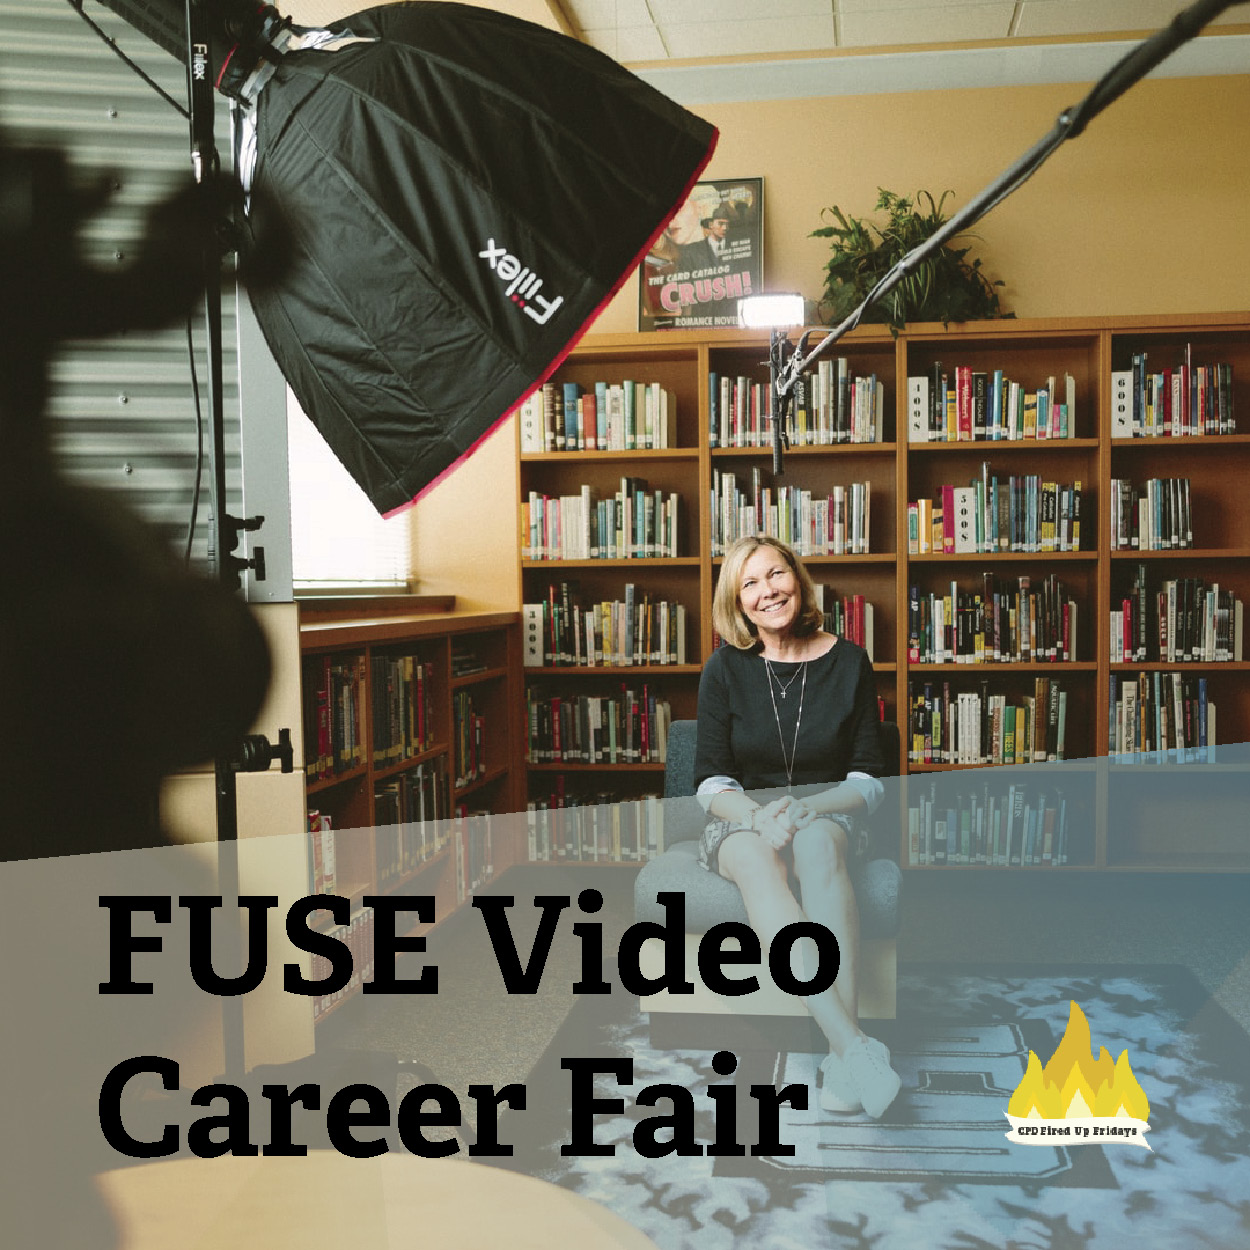 A woman sits on a chair in a room, surrounded by bookcases. A camera and lighting equipment is set up in front of her. Underneath, text reads: 'FUSE Video Career Fair.'